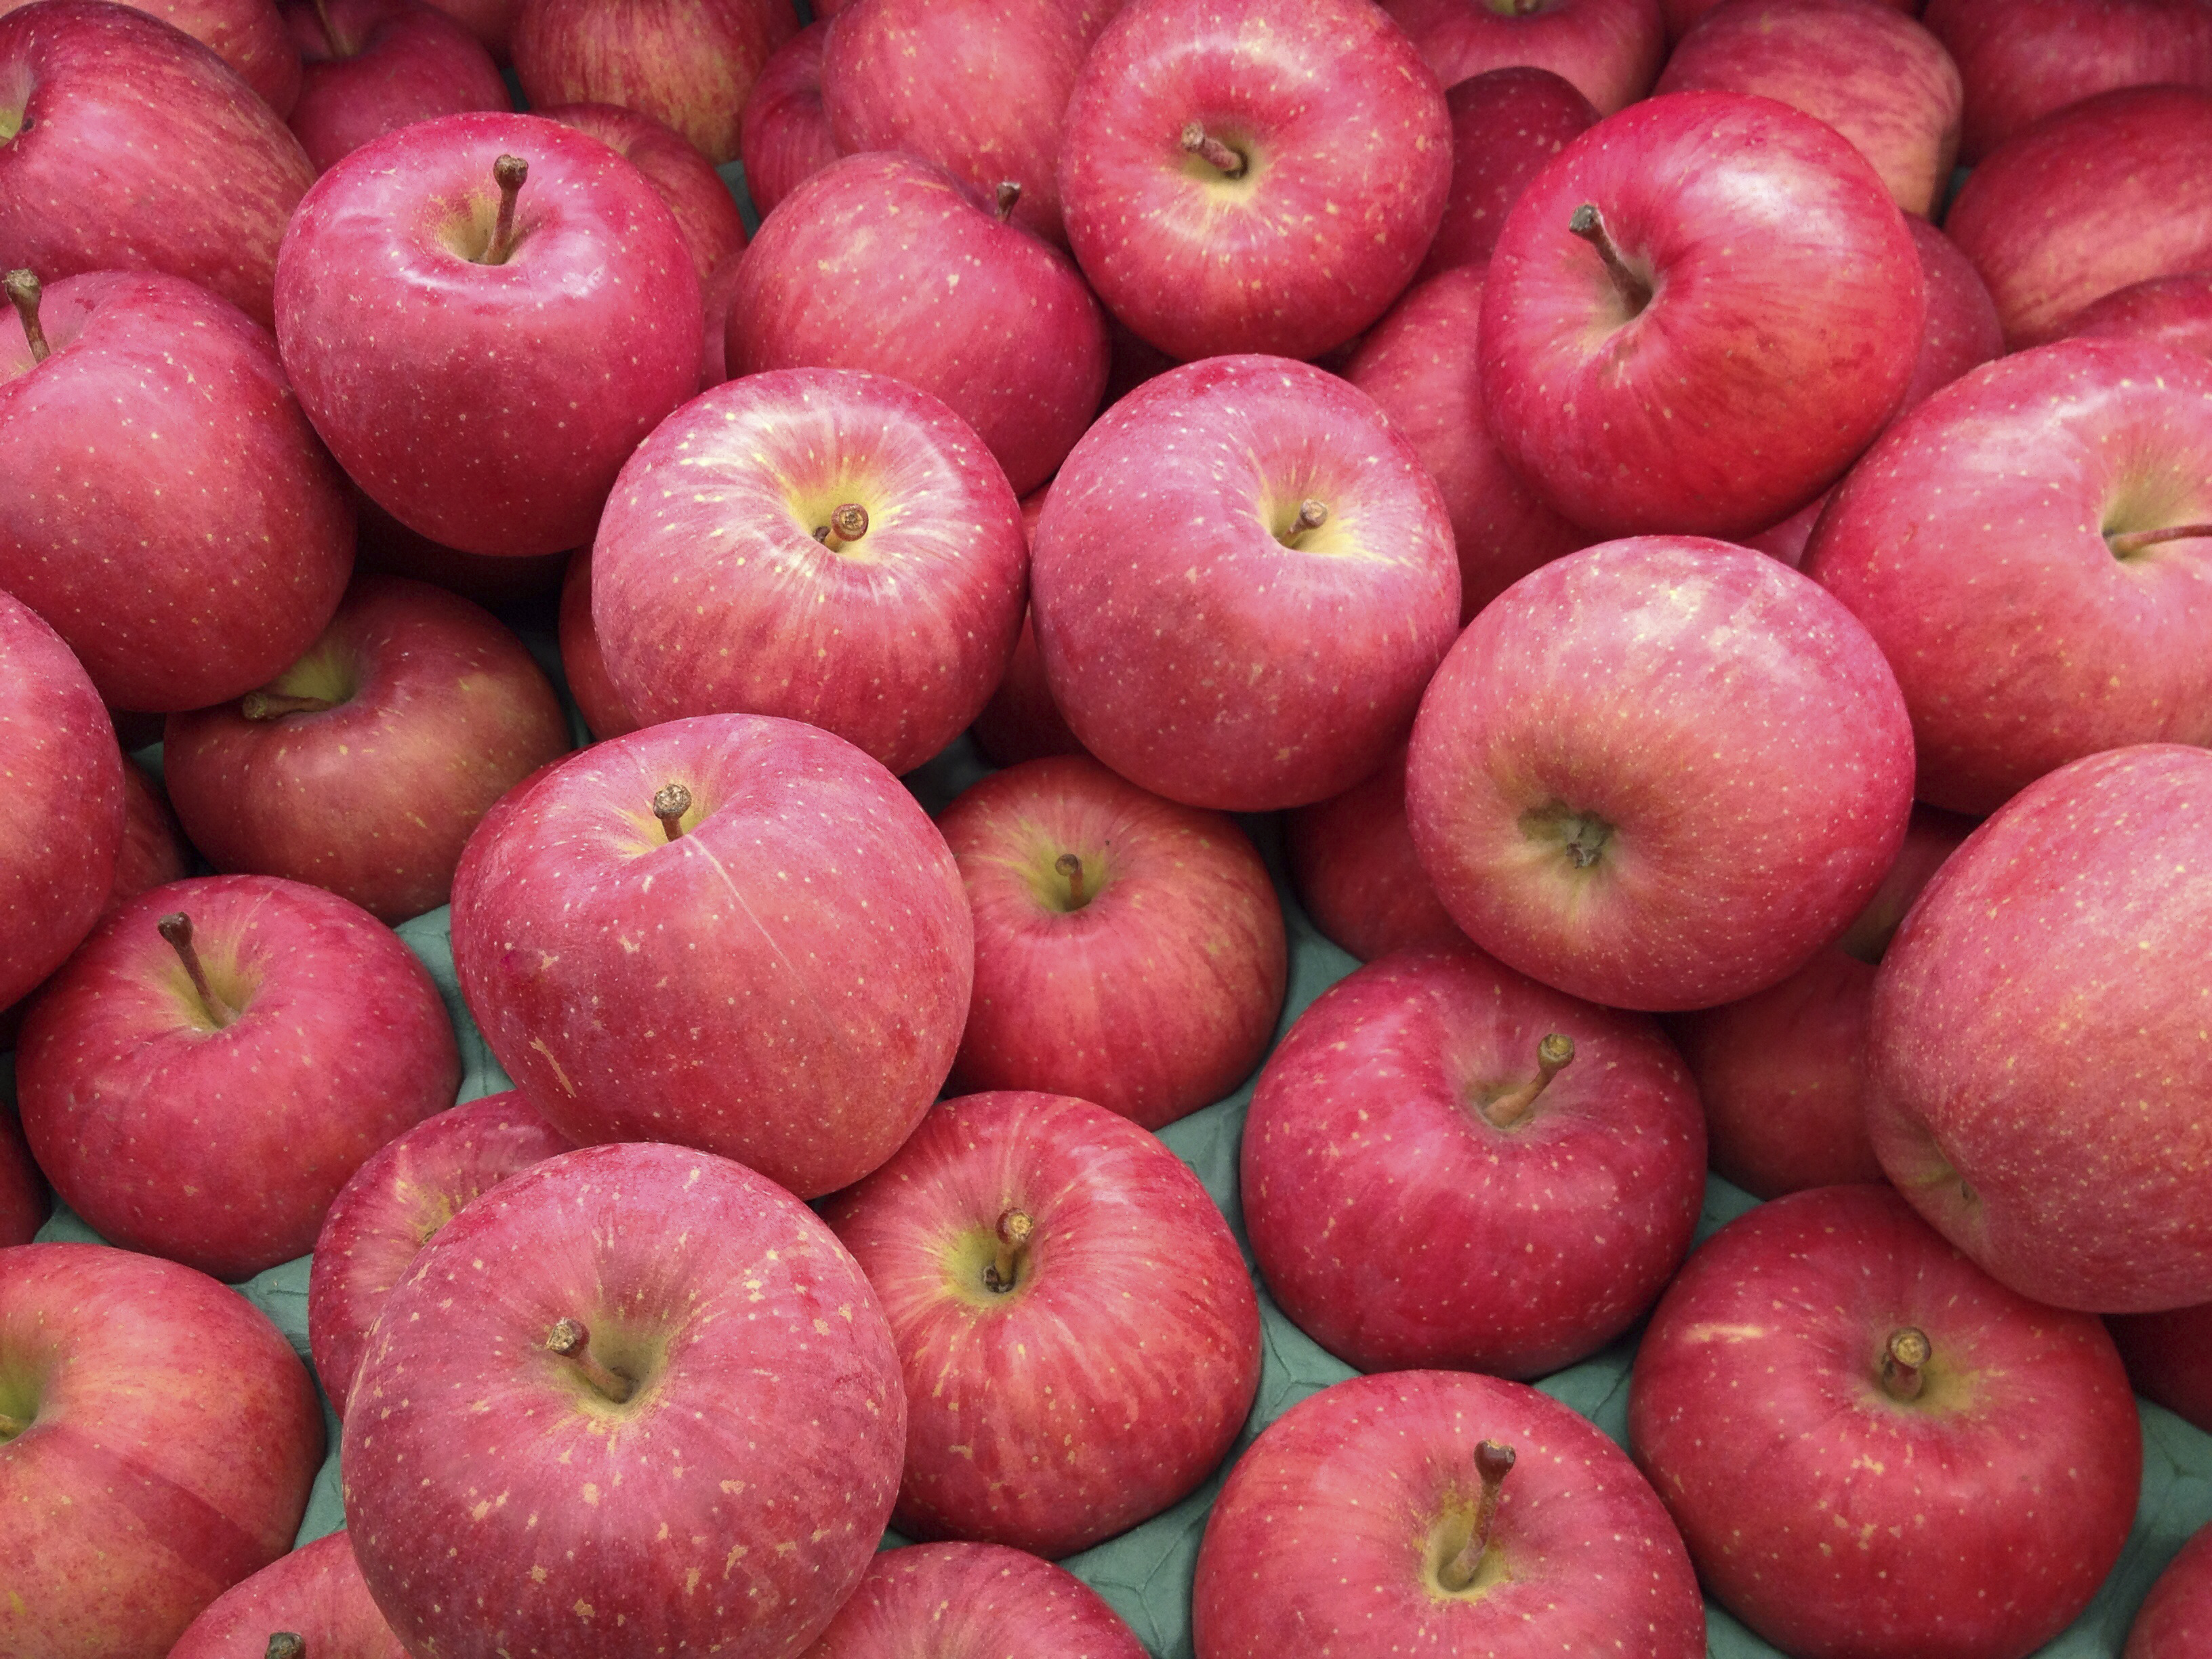 Fuji Apples Information and Facts